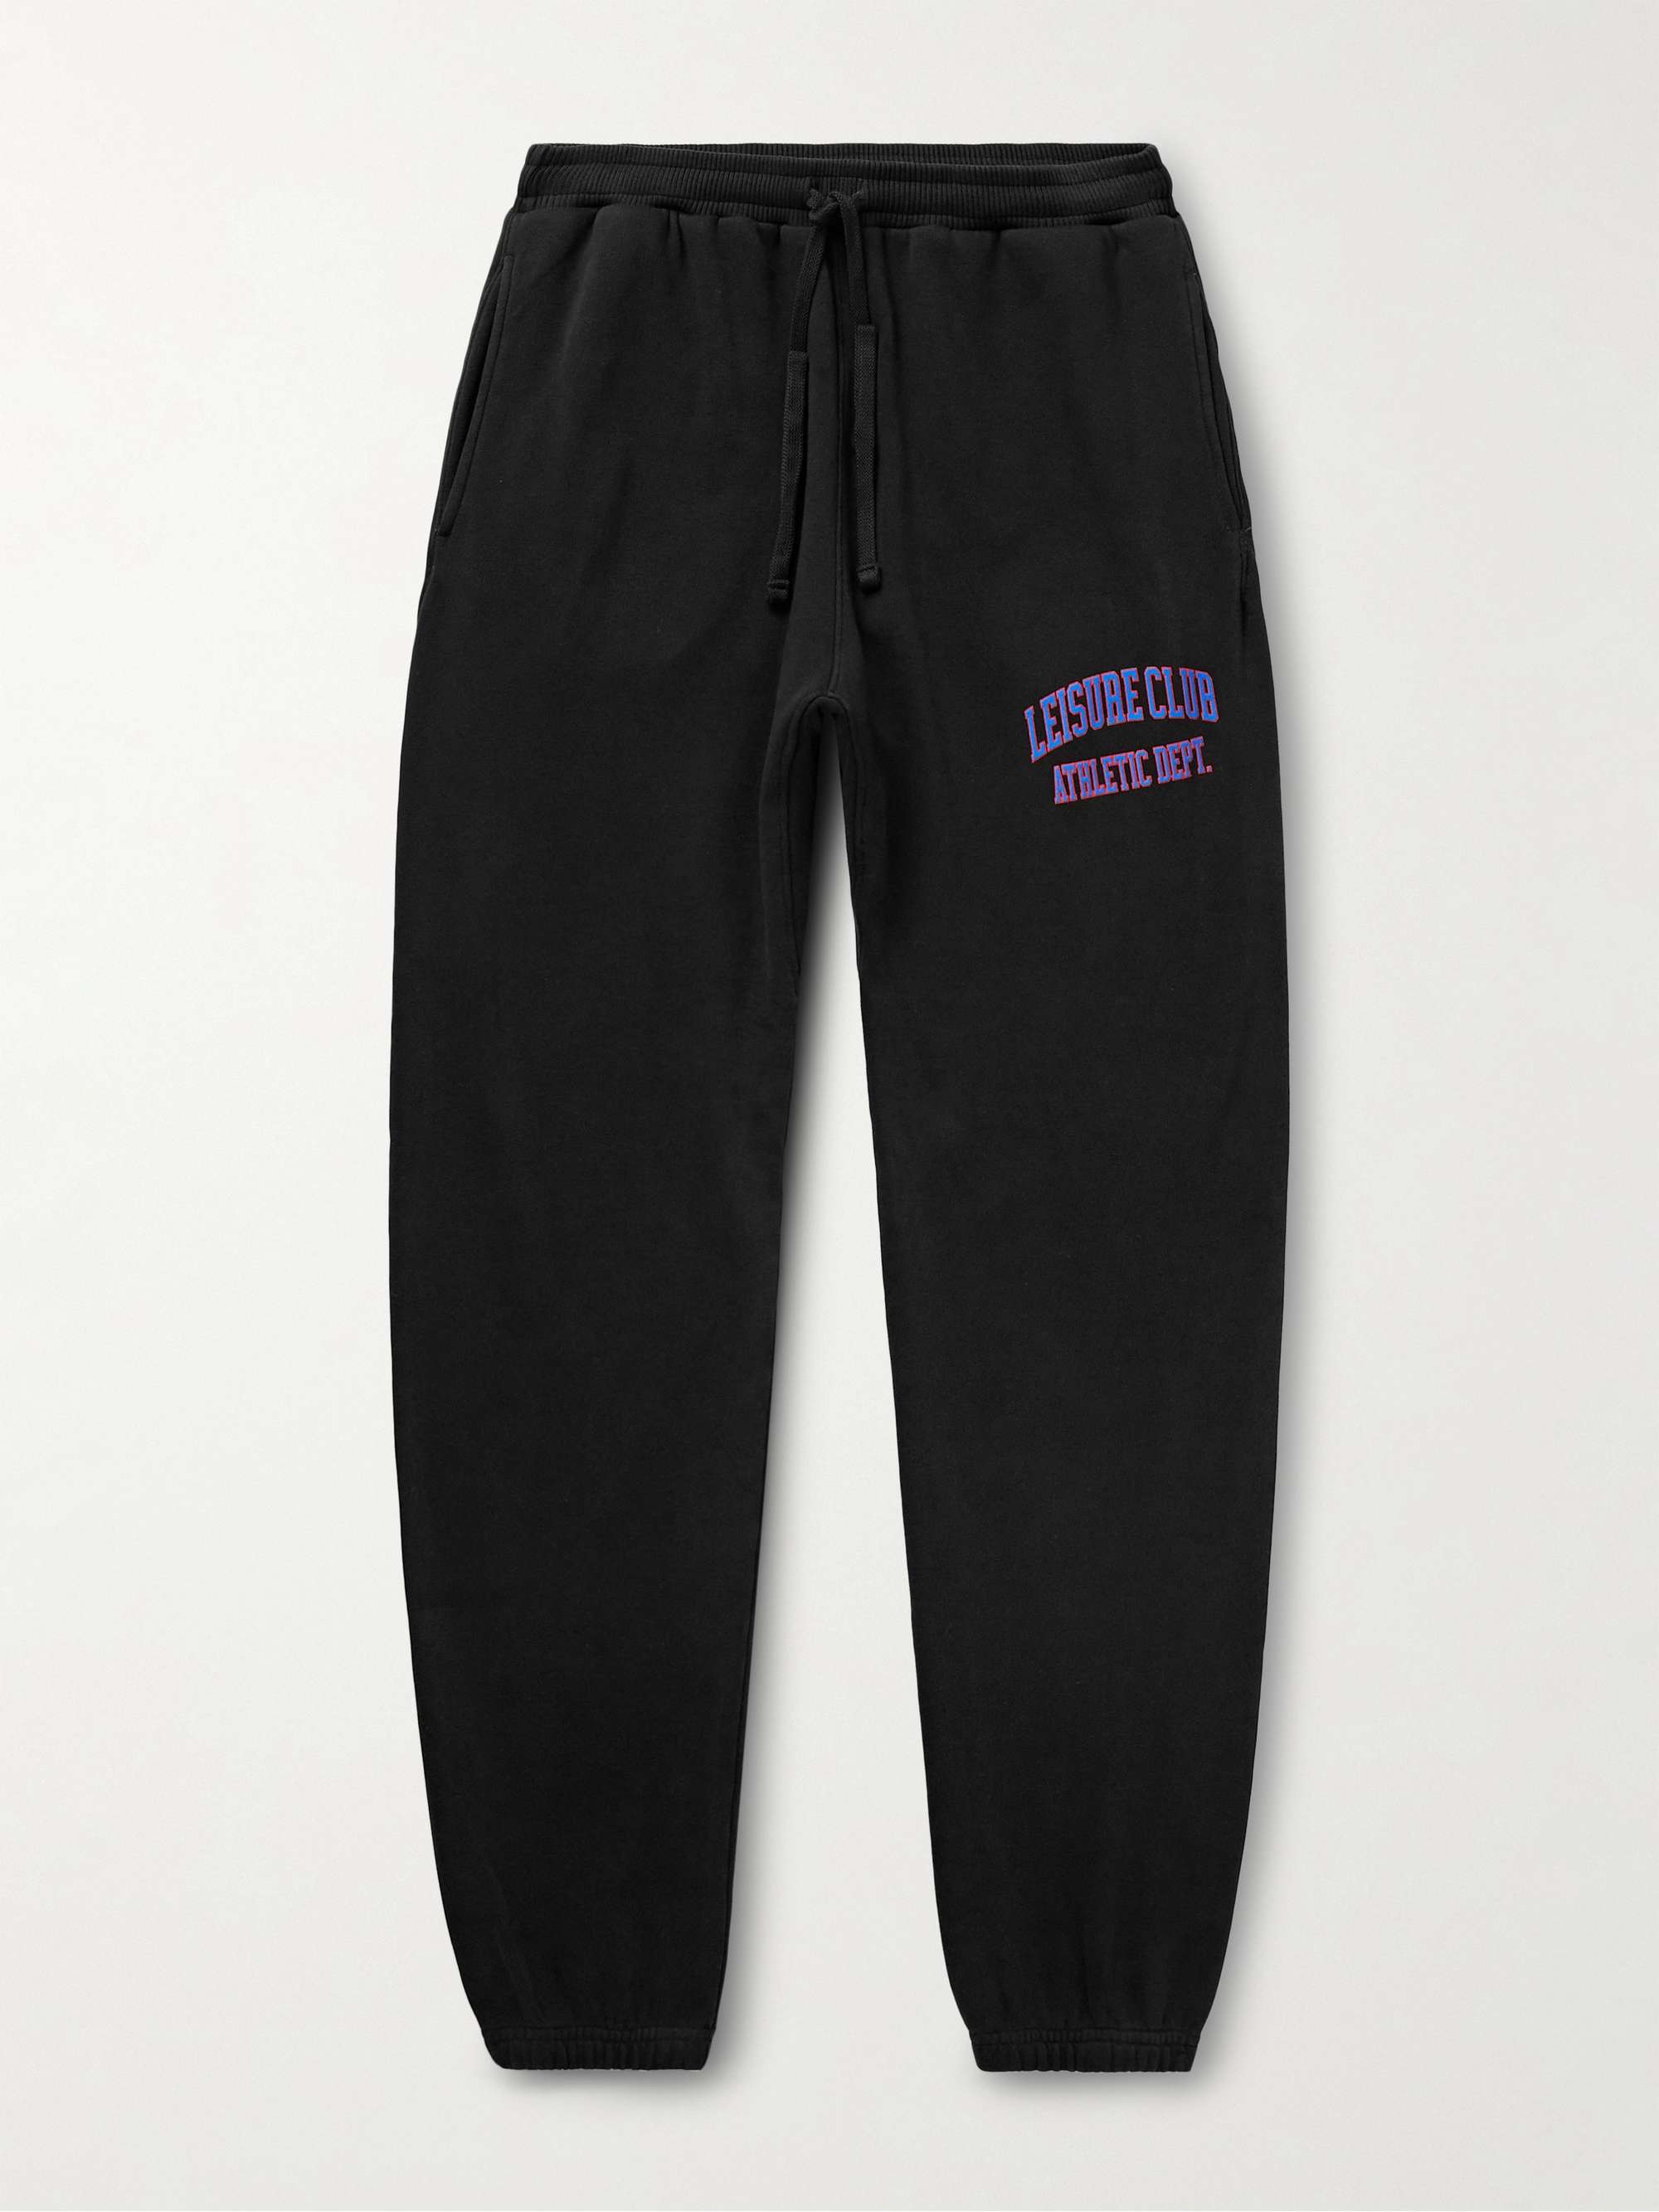 PASADENA LEISURE CLUB Athletic Dept. Tapered Logo-Print Garment-Dyed  Cotton-Jersey Sweatpants for Men